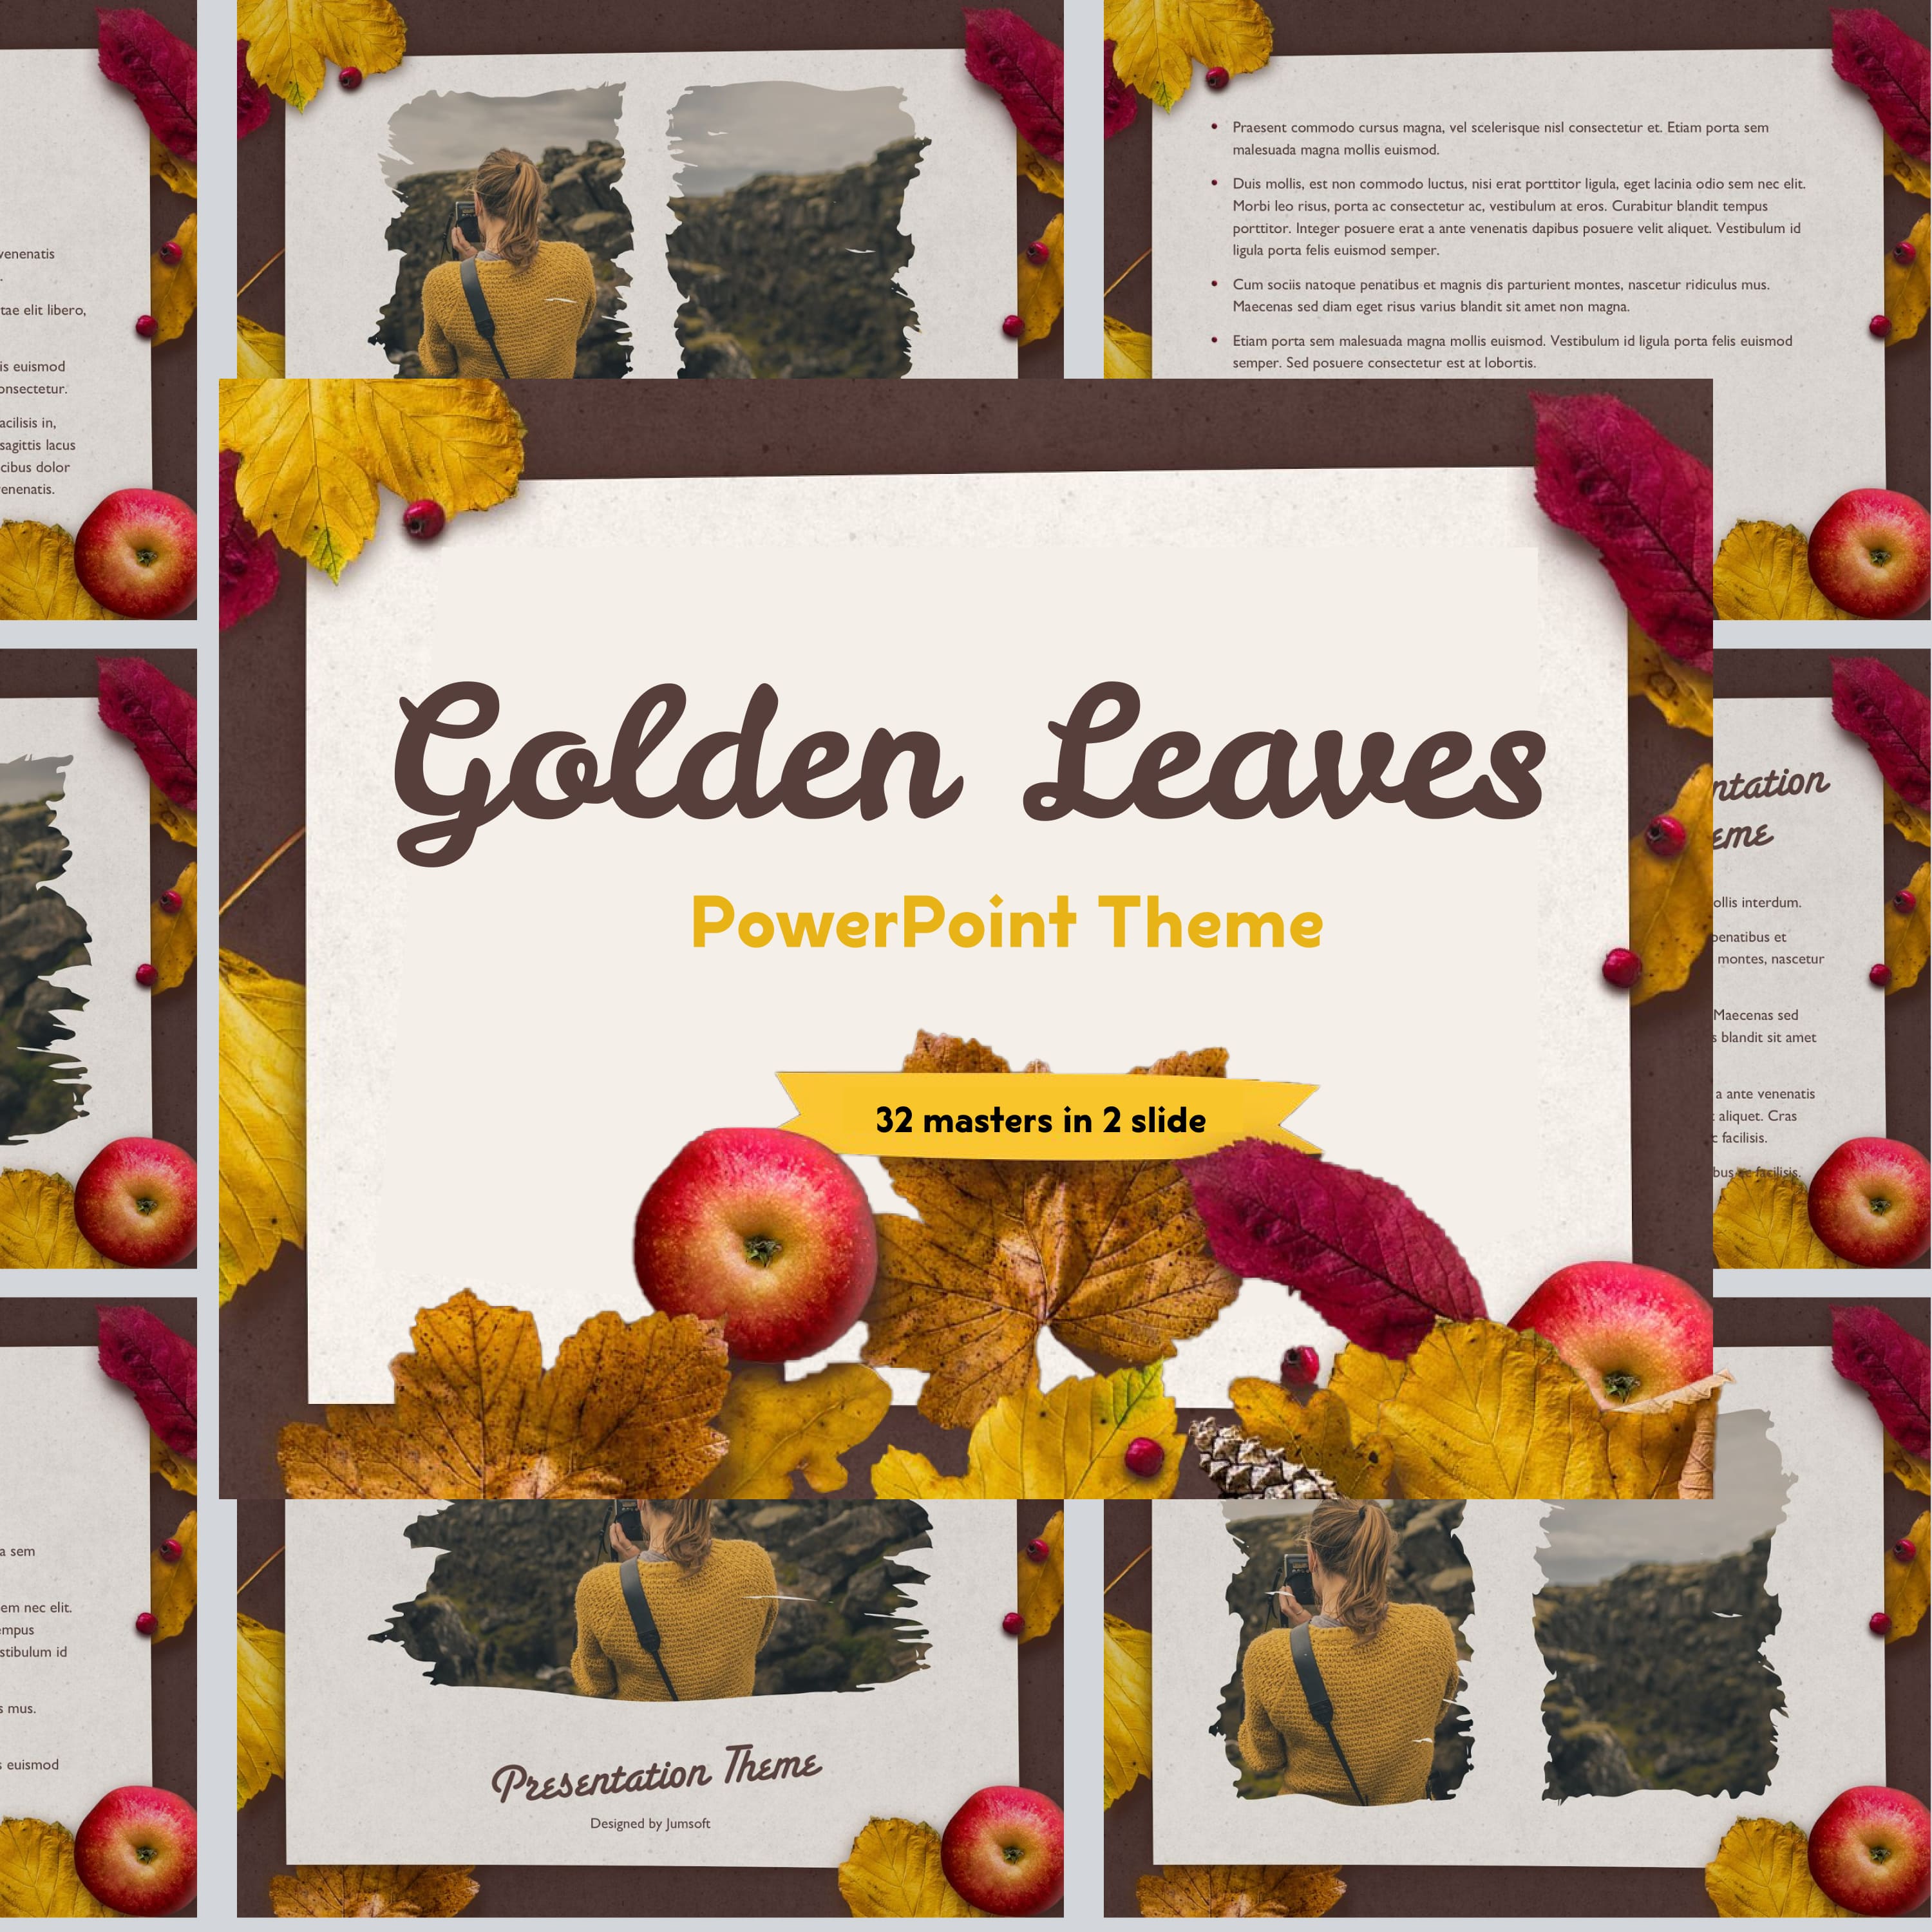 Golden Leaves PowerPoint Theme cover.